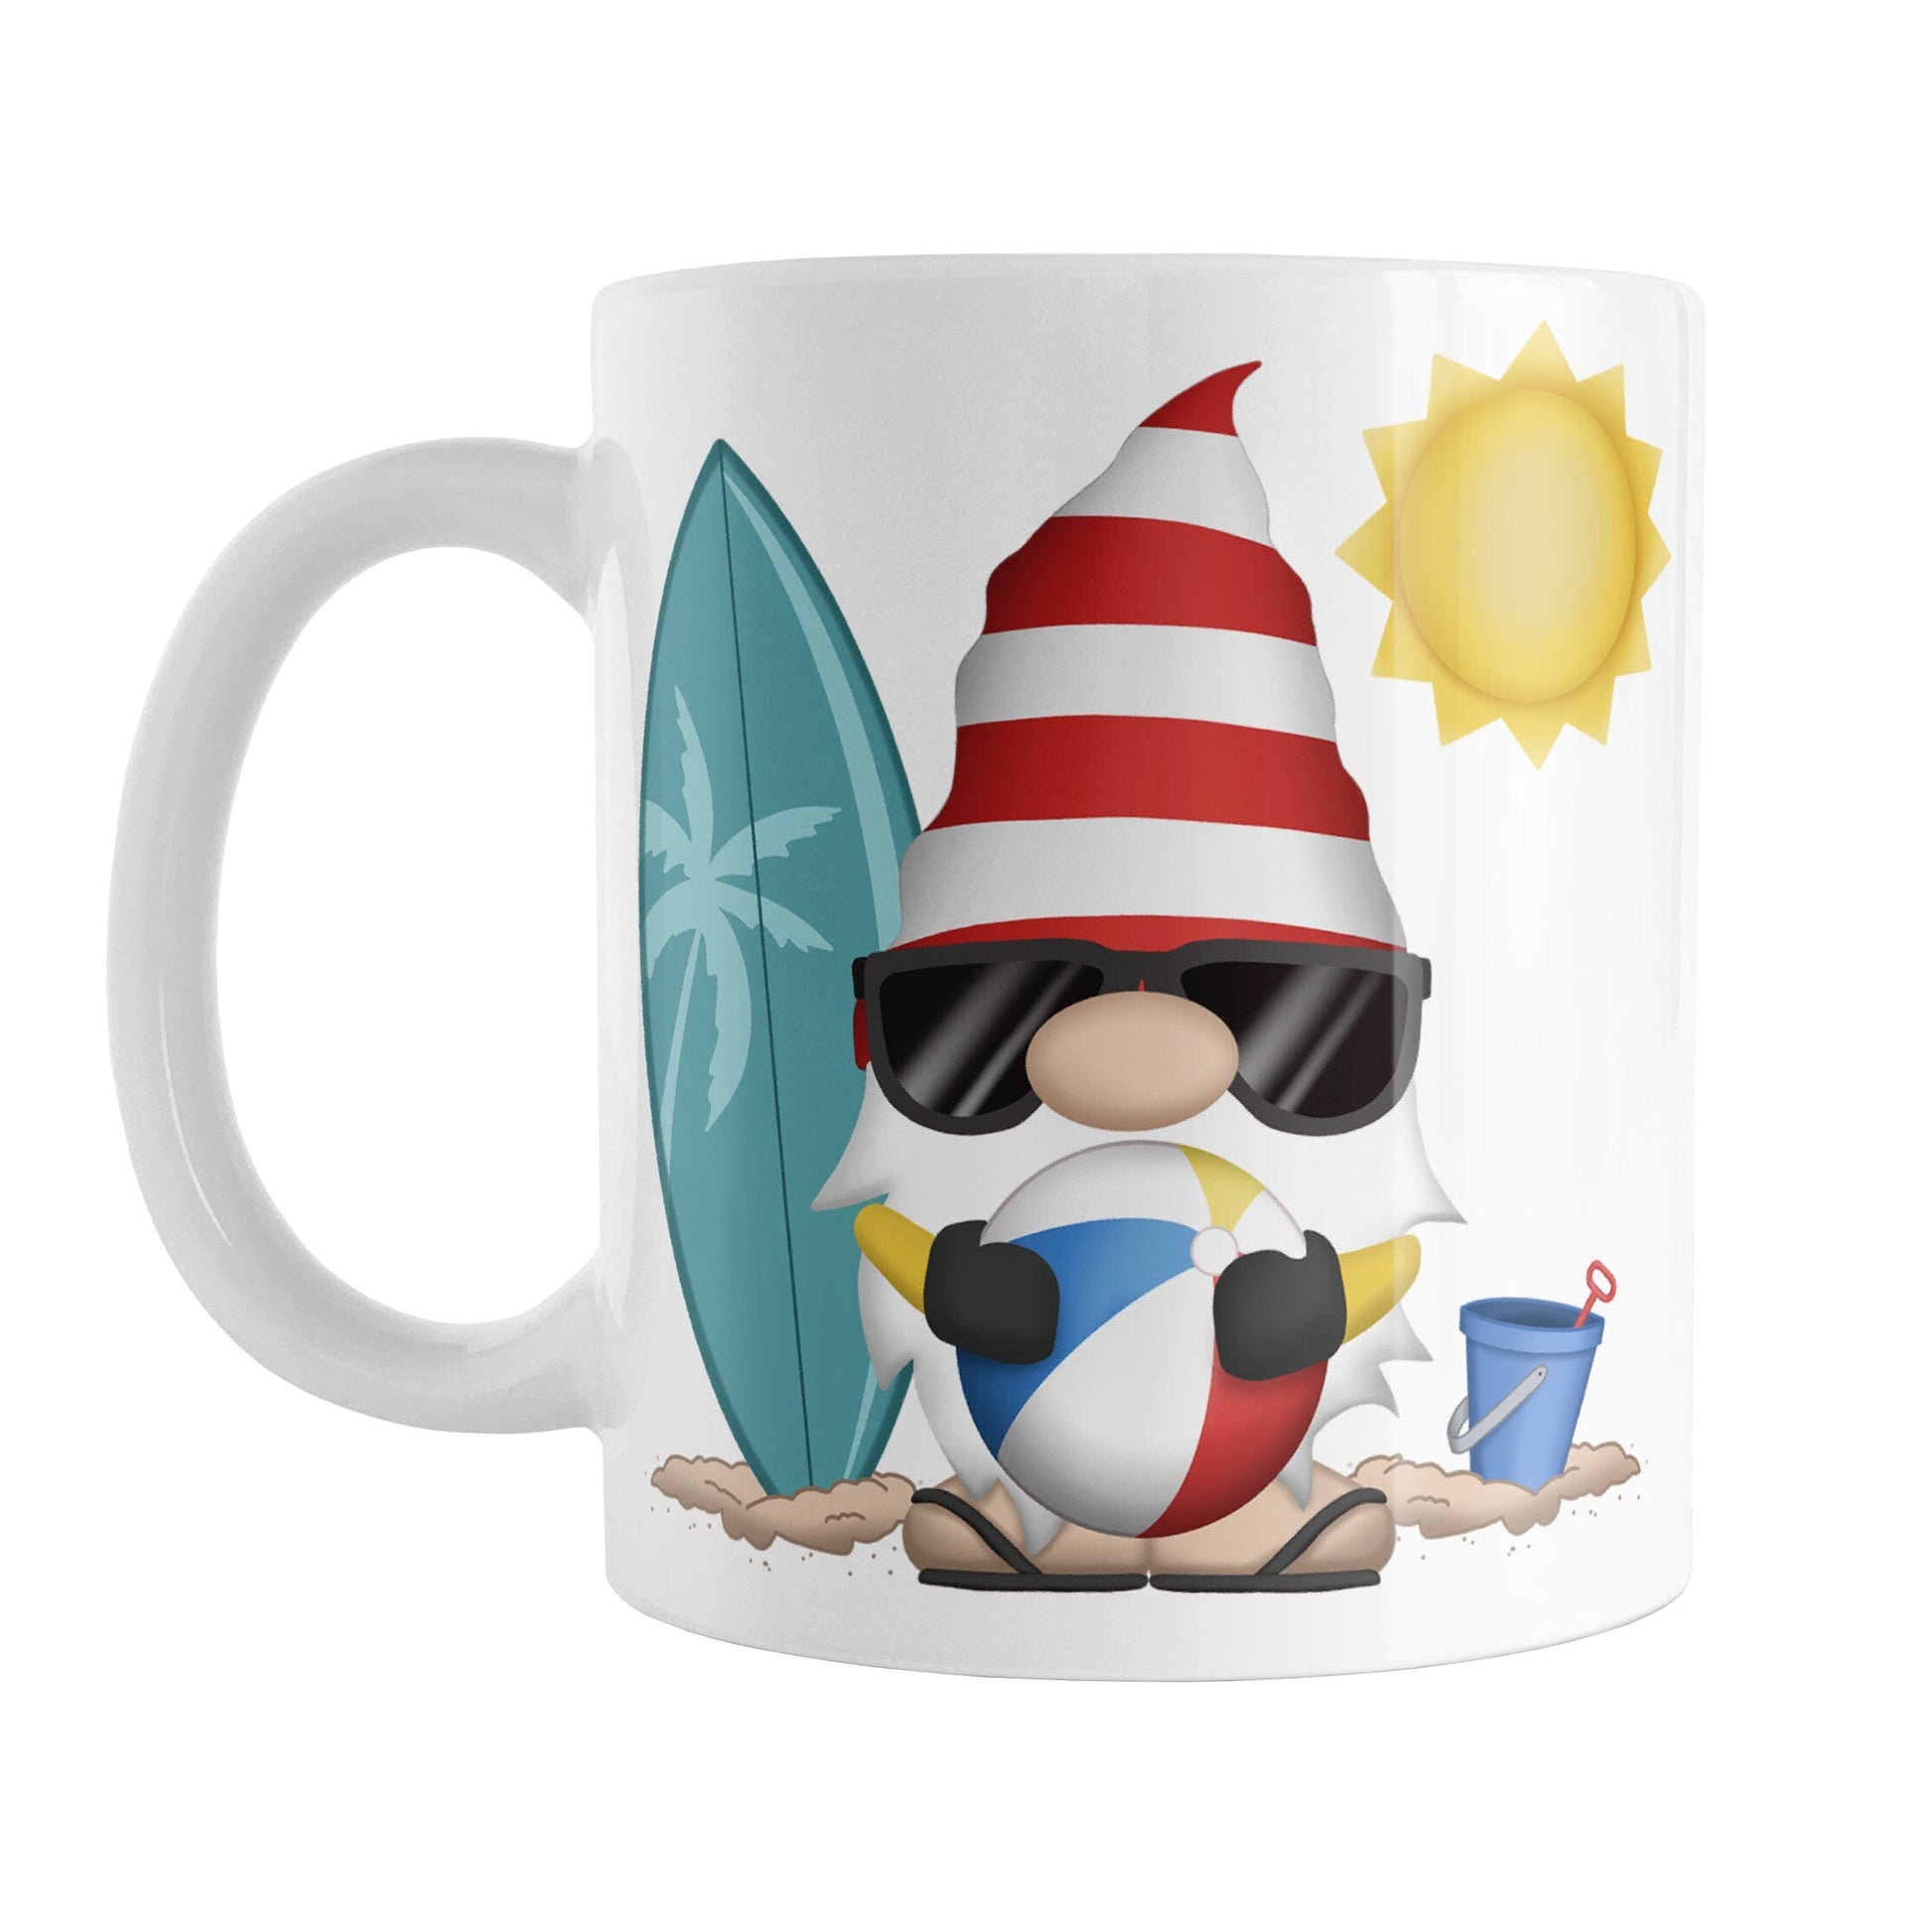 Summer Beach Gnome Mug (11oz) at Amy's Coffee Mugs. A ceramic coffee mug designed with an adorable gnome in sunglasses, holding a beach ball, with a surfboard and bucket in the sand on either side of him, and a bright yellow sun in the sky. This cute gnome is on both sides of the mug.